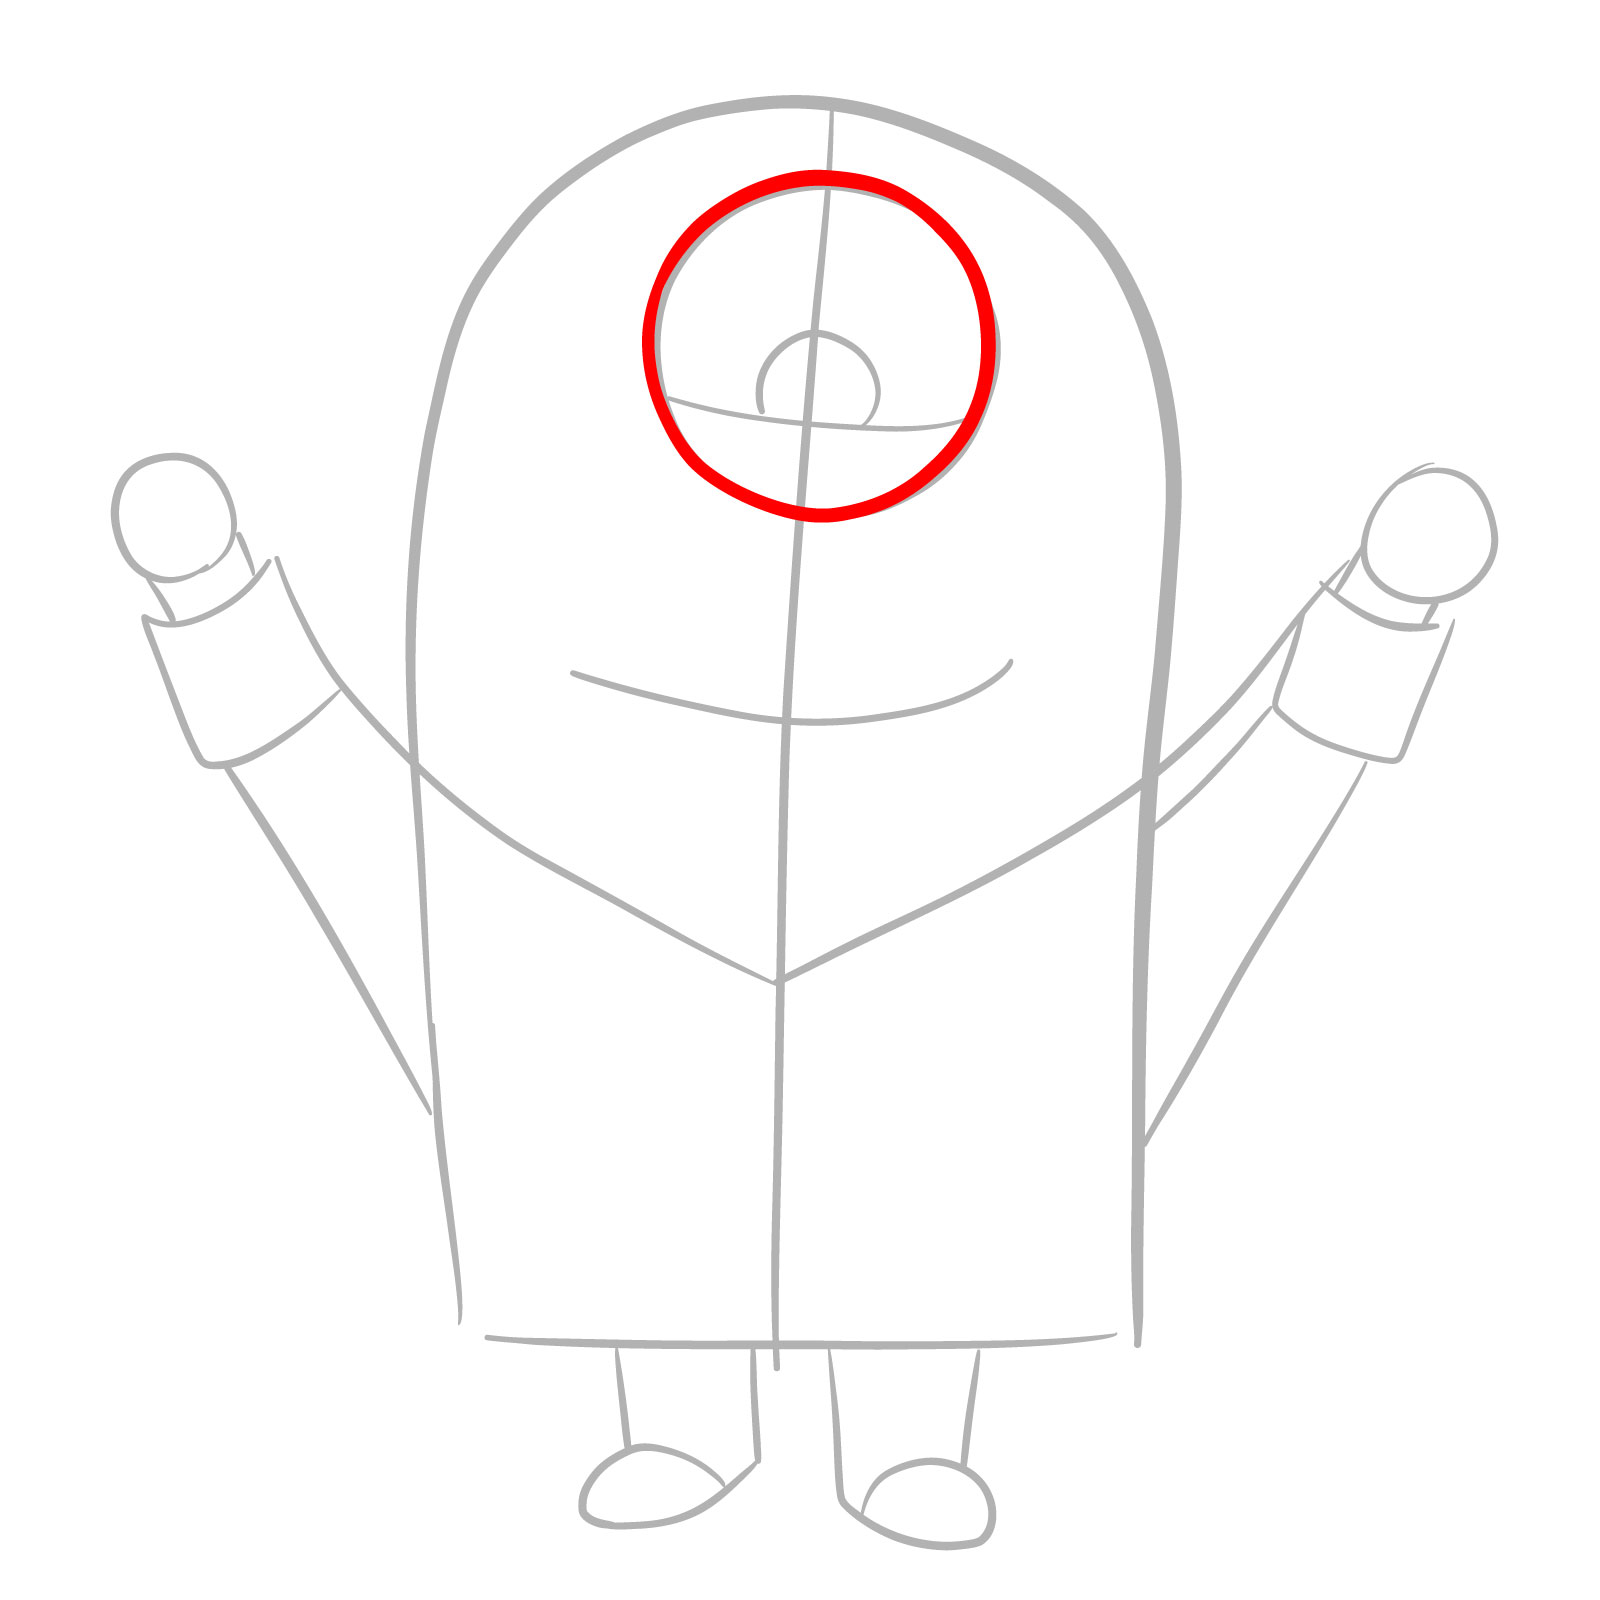 How to Draw a Vampire Minion - step 04